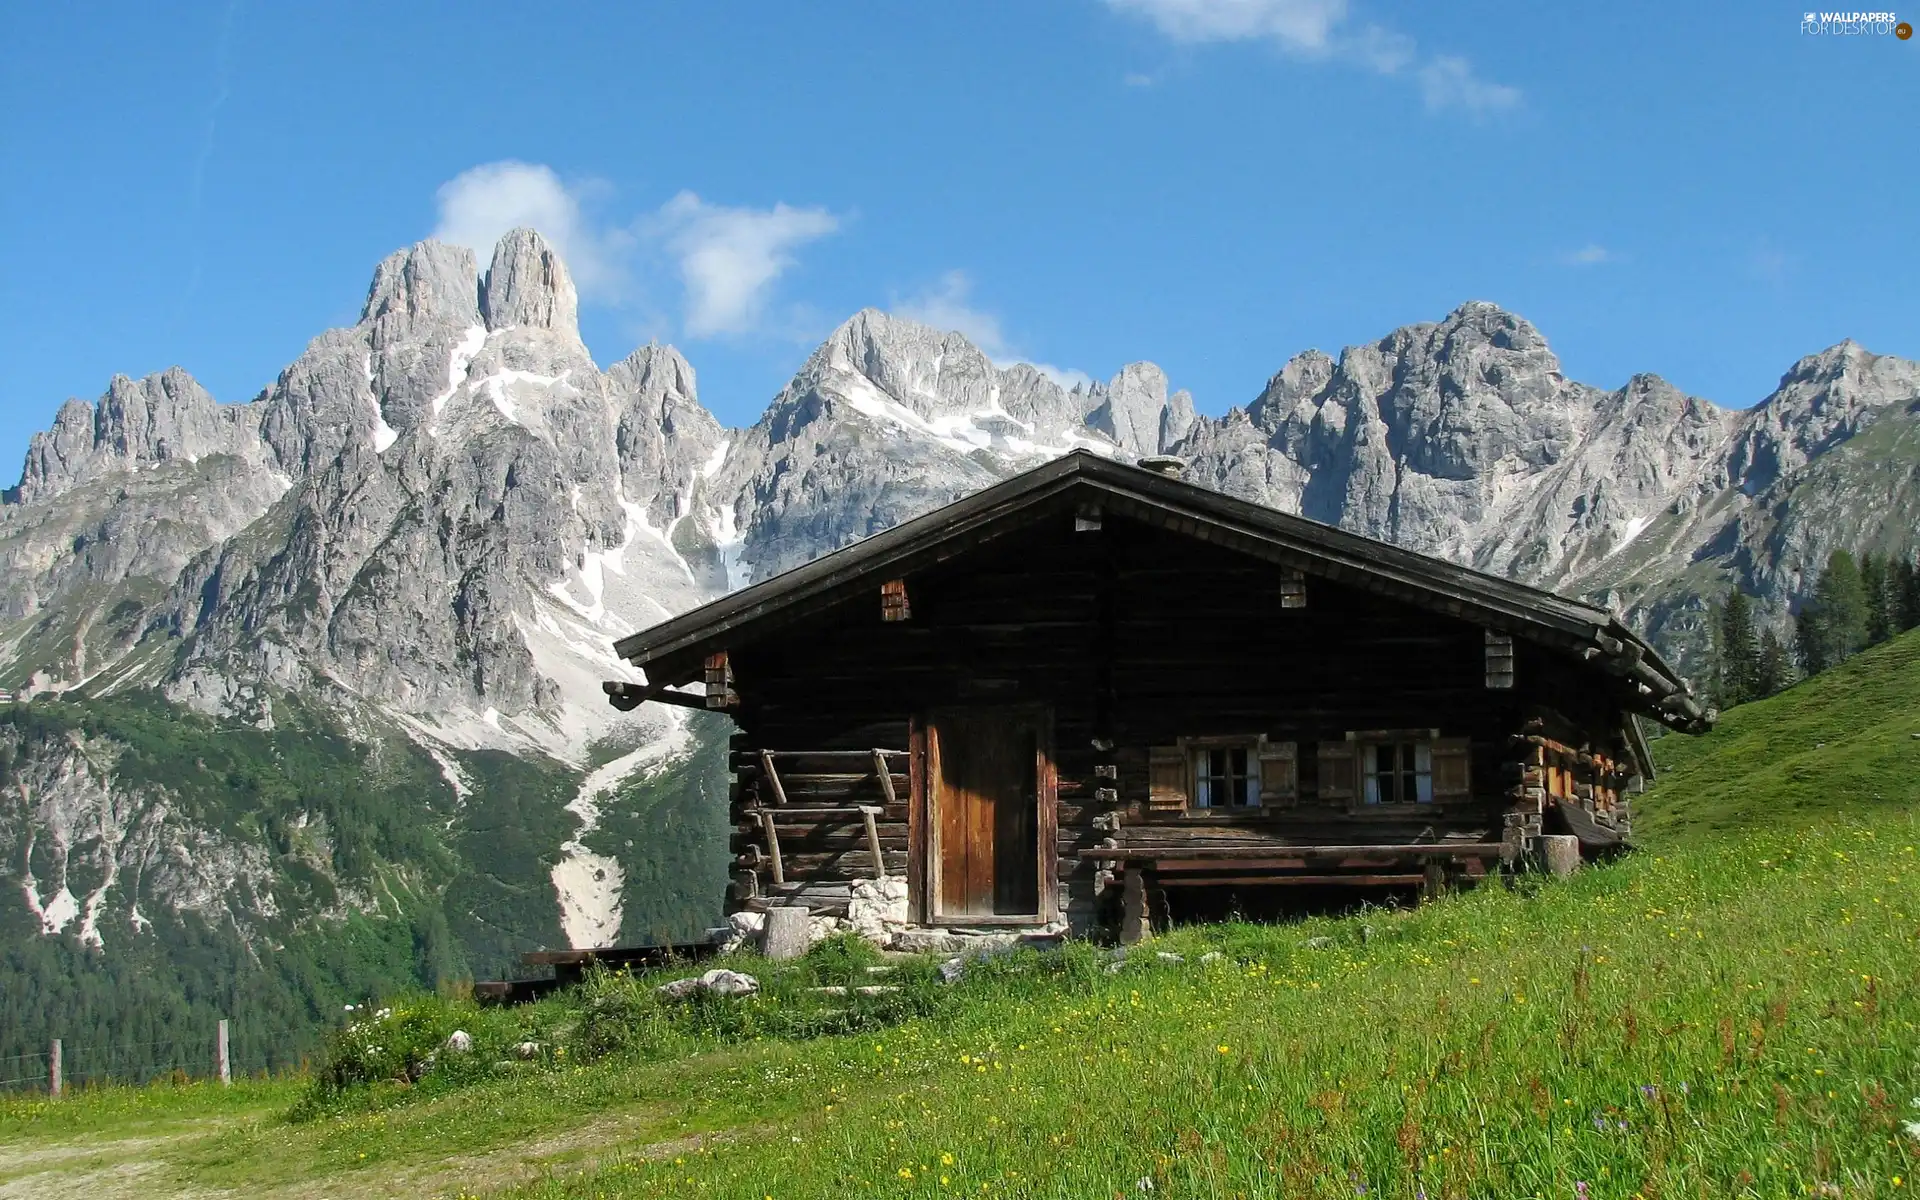 Mountains, grass, house, Rocky, wooden